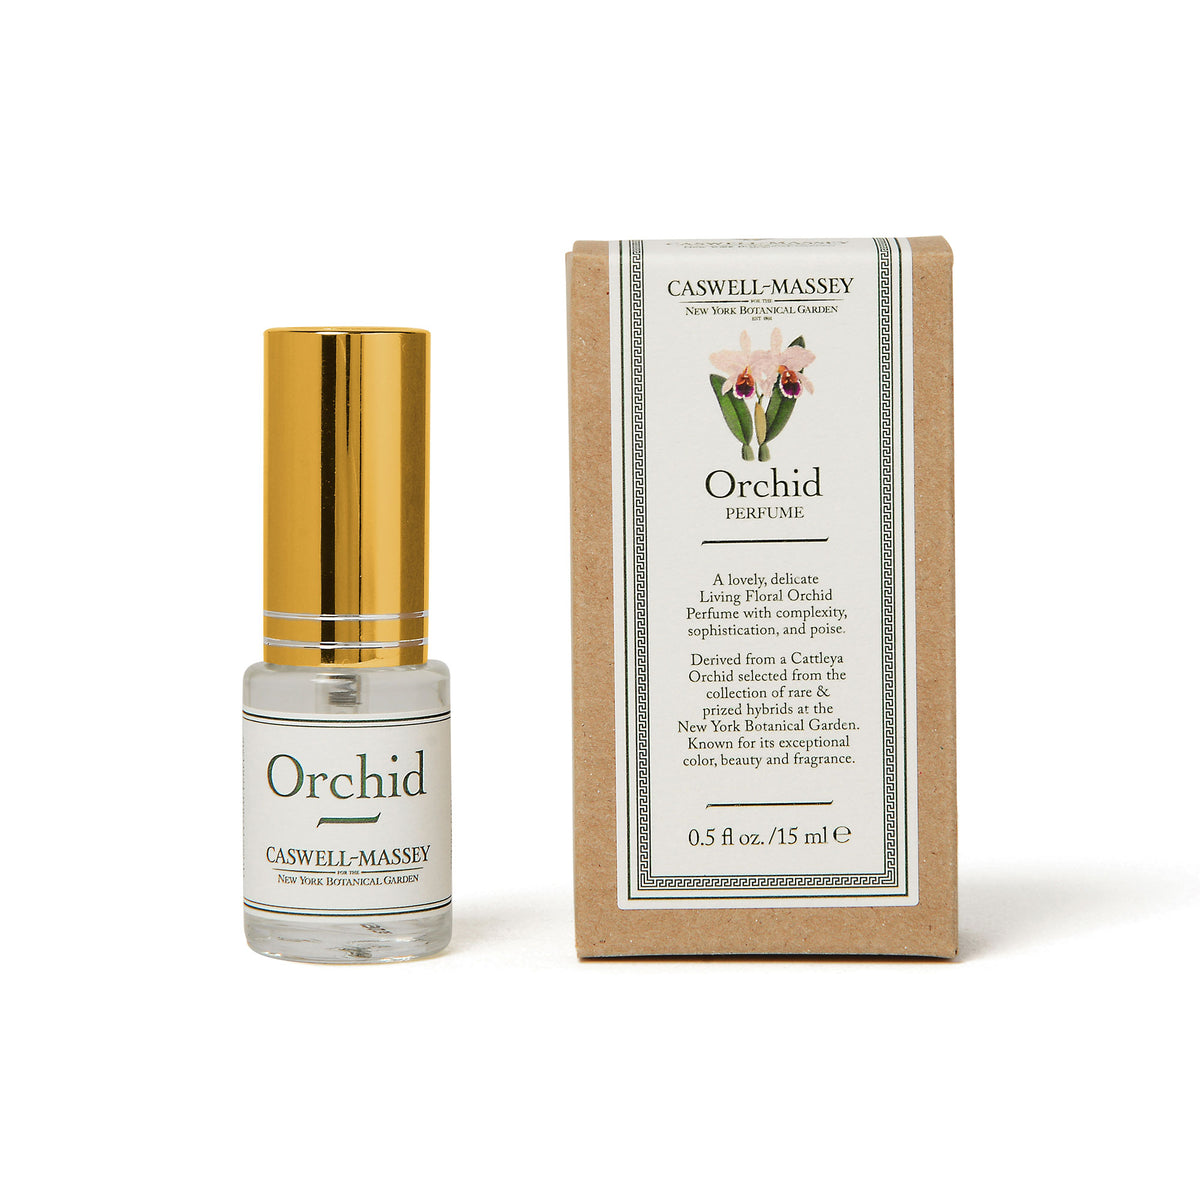 Caswell-Massey Orchid 15ml Perfume